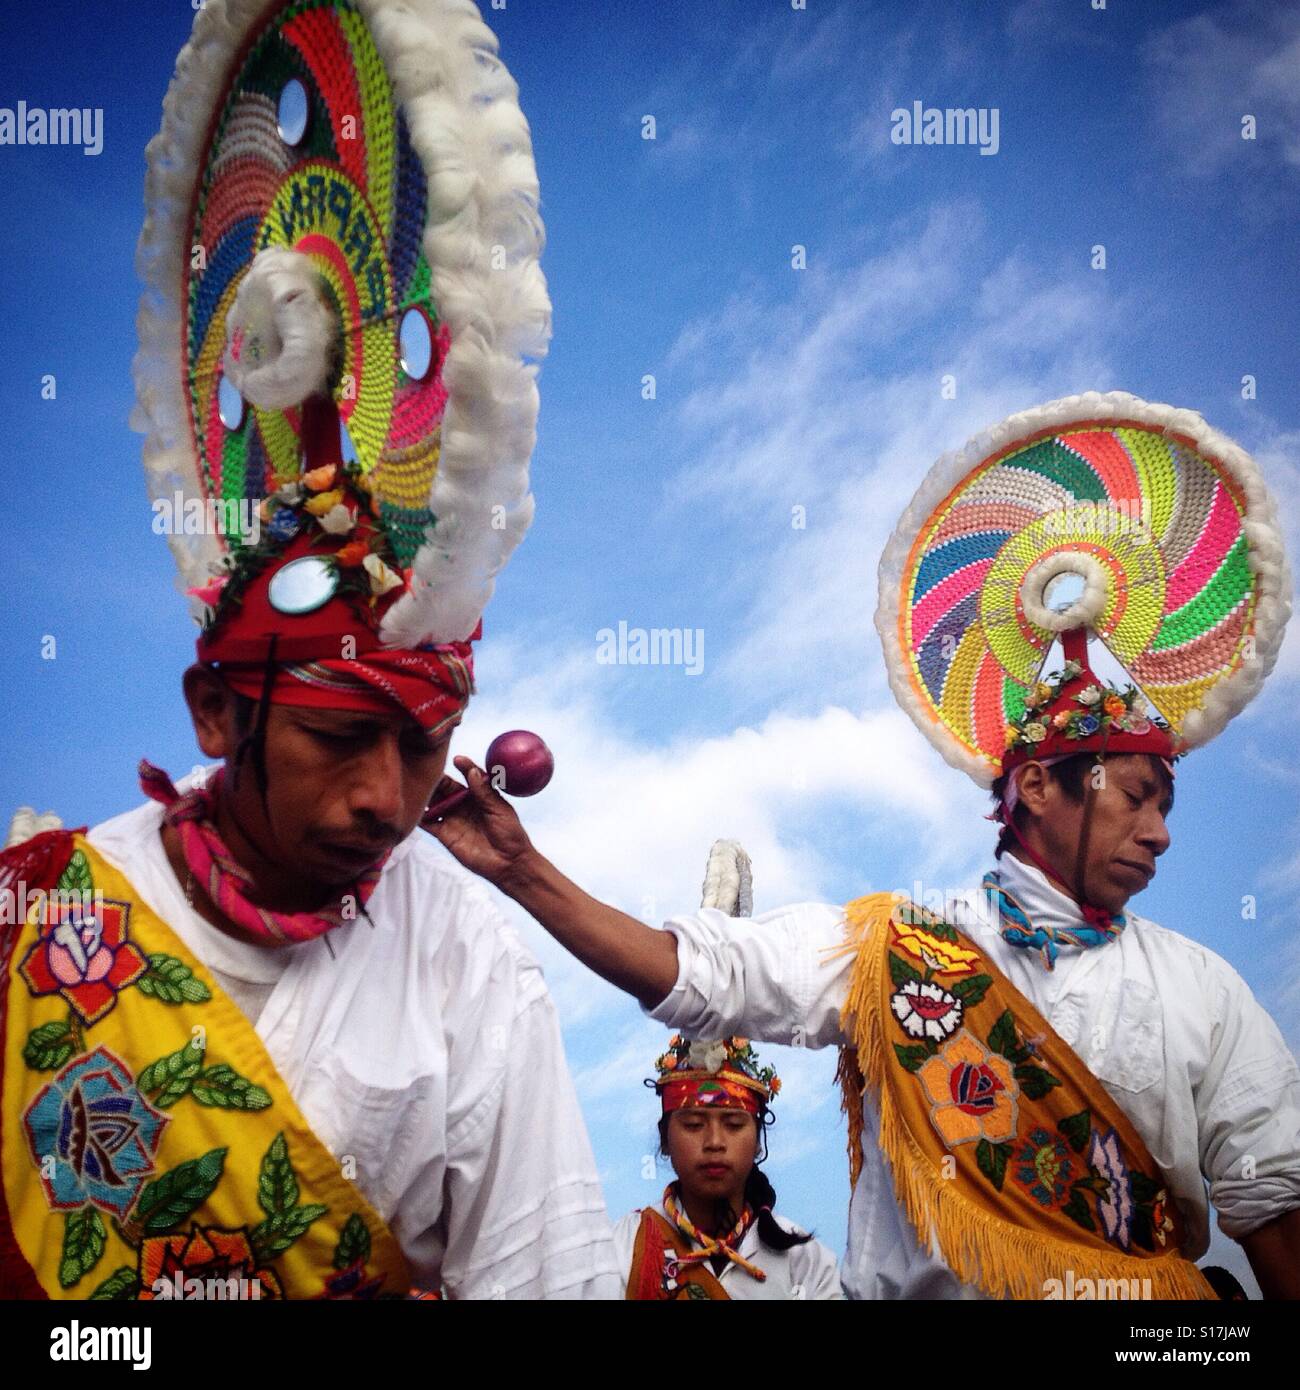 Dancers from Papantla, Veracruz, perform during the anual pilgrimage to Our Lady of Guadalupe, in Mexico City, Mexico Stock Photo